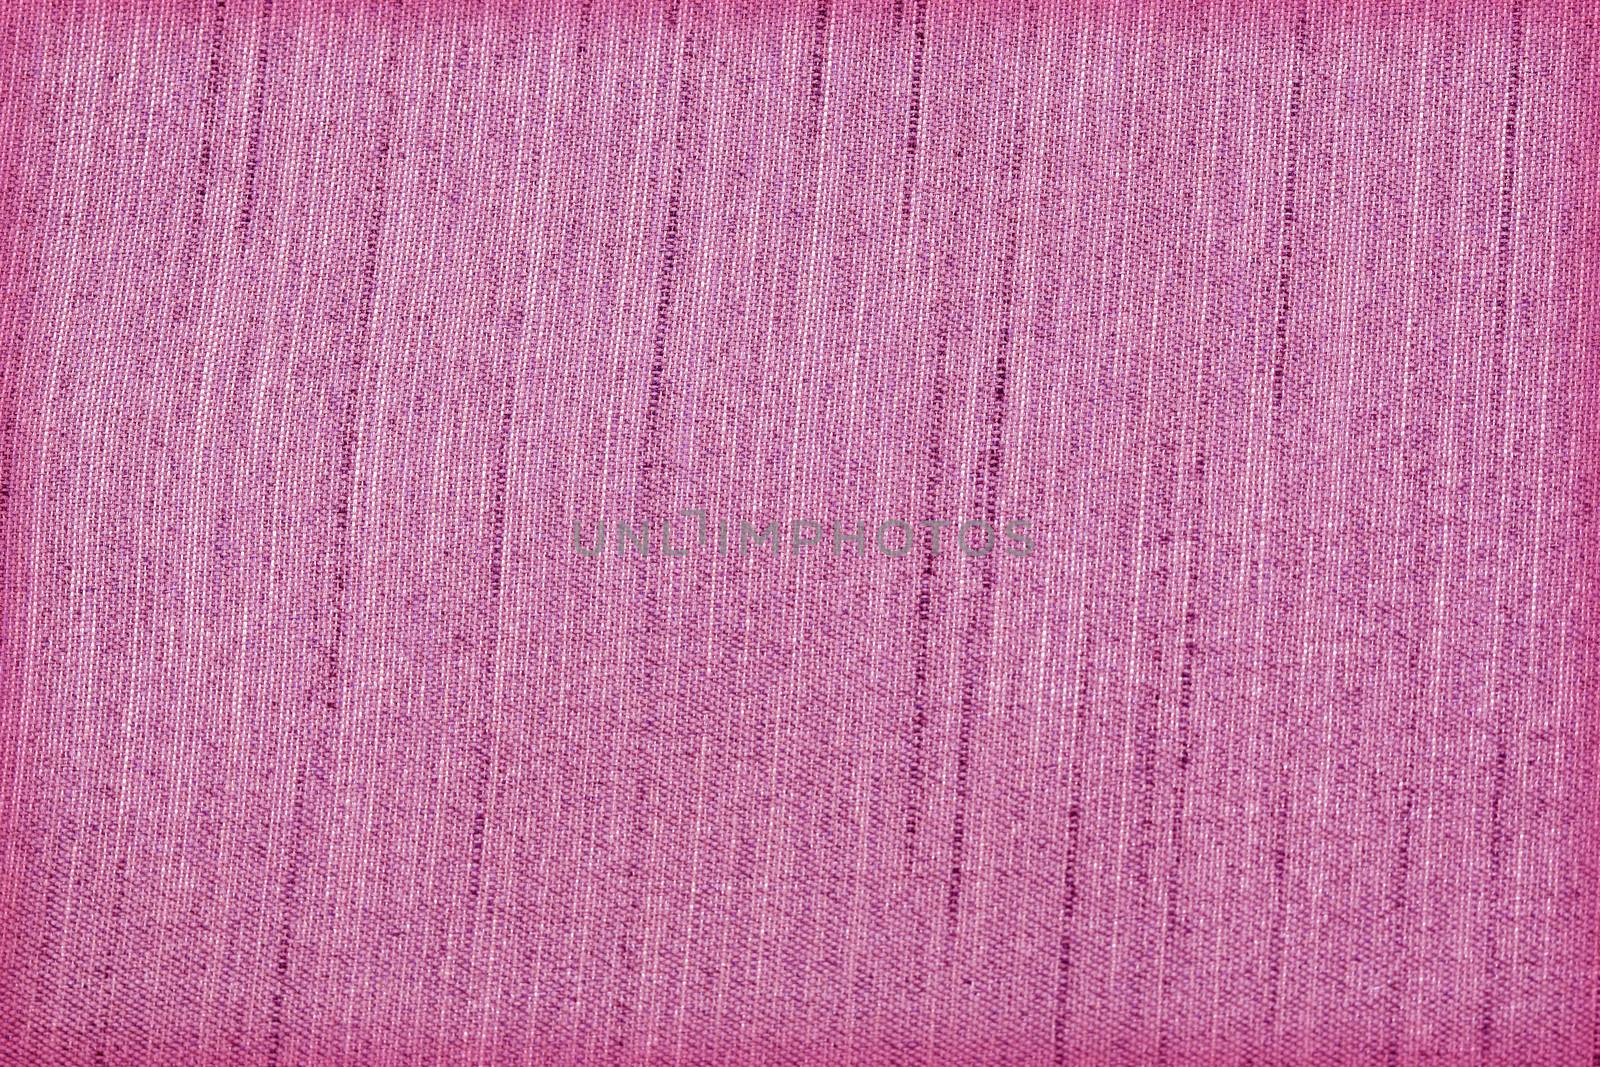 Wallpapers pink artificial background decoration macro details.